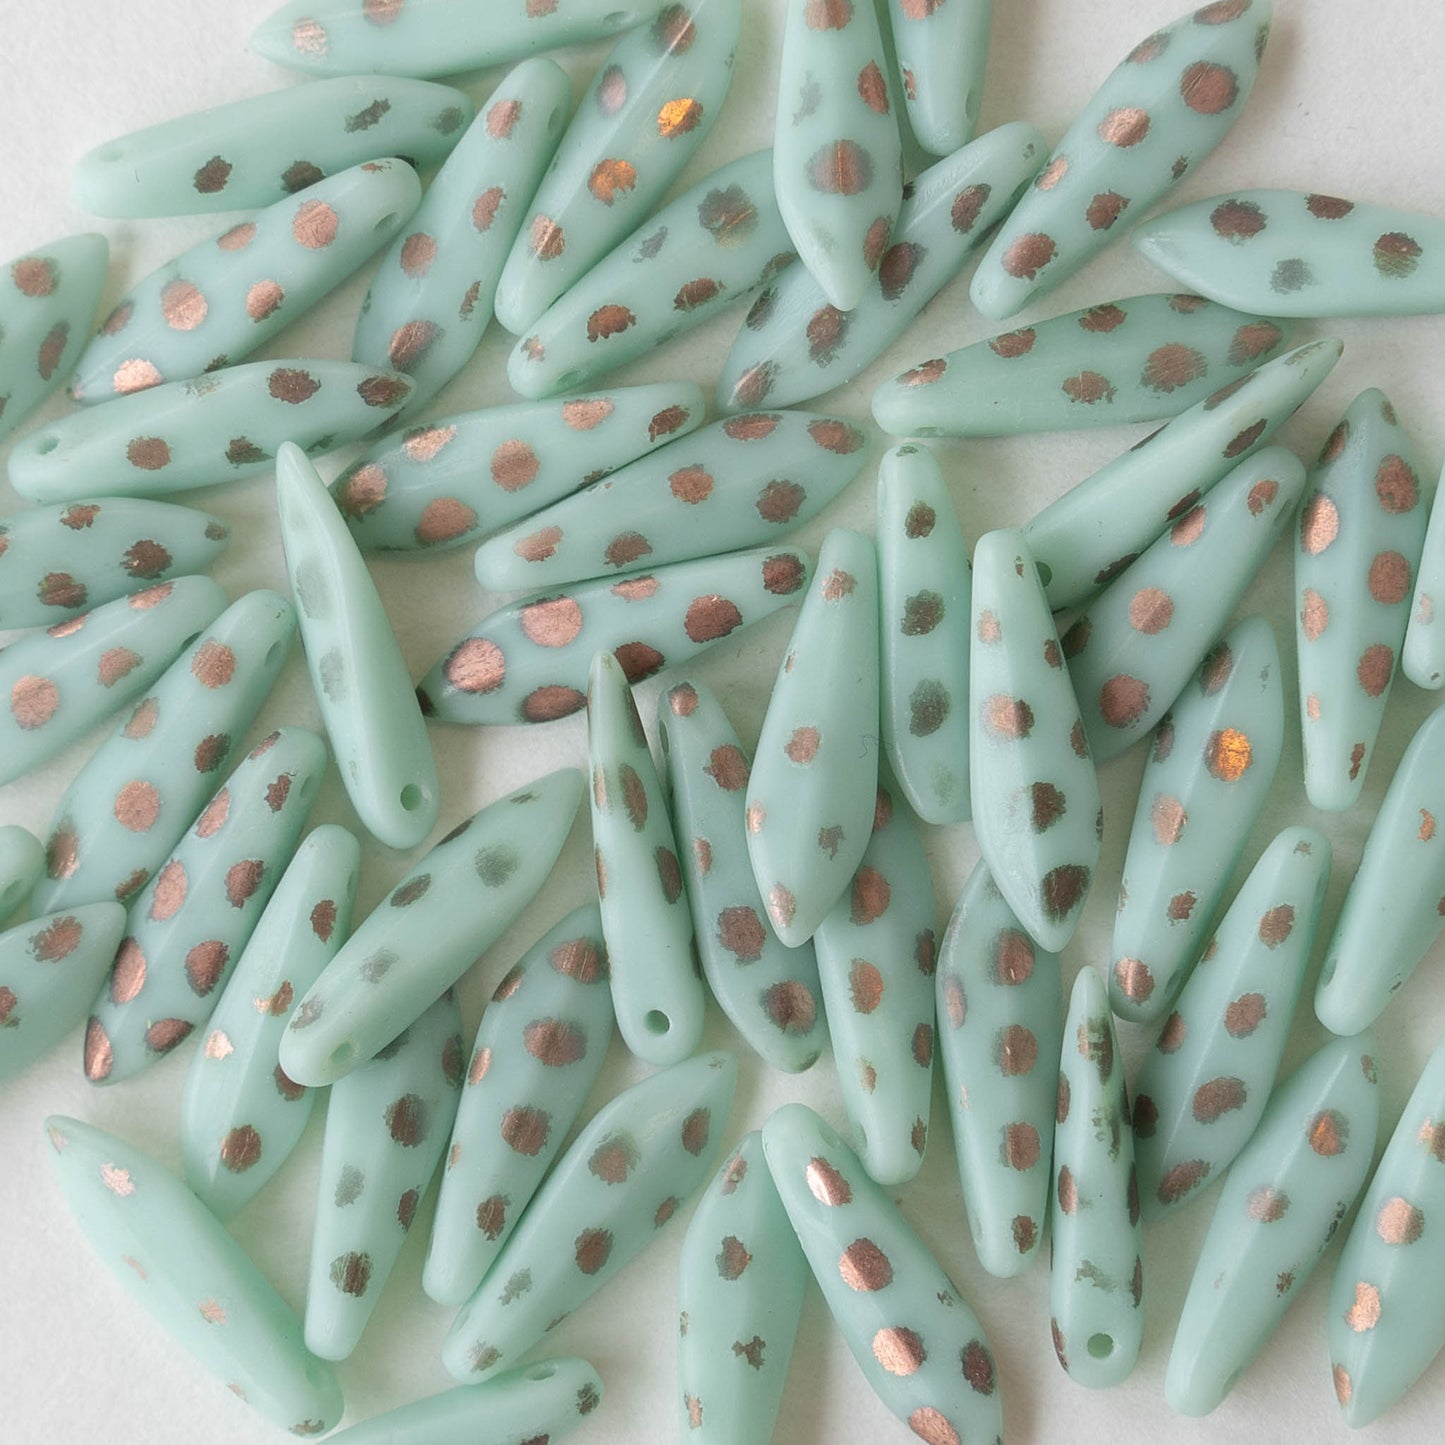 16mm Dagger Beads - Opaque Mint with Copper Dots  - 50 beads